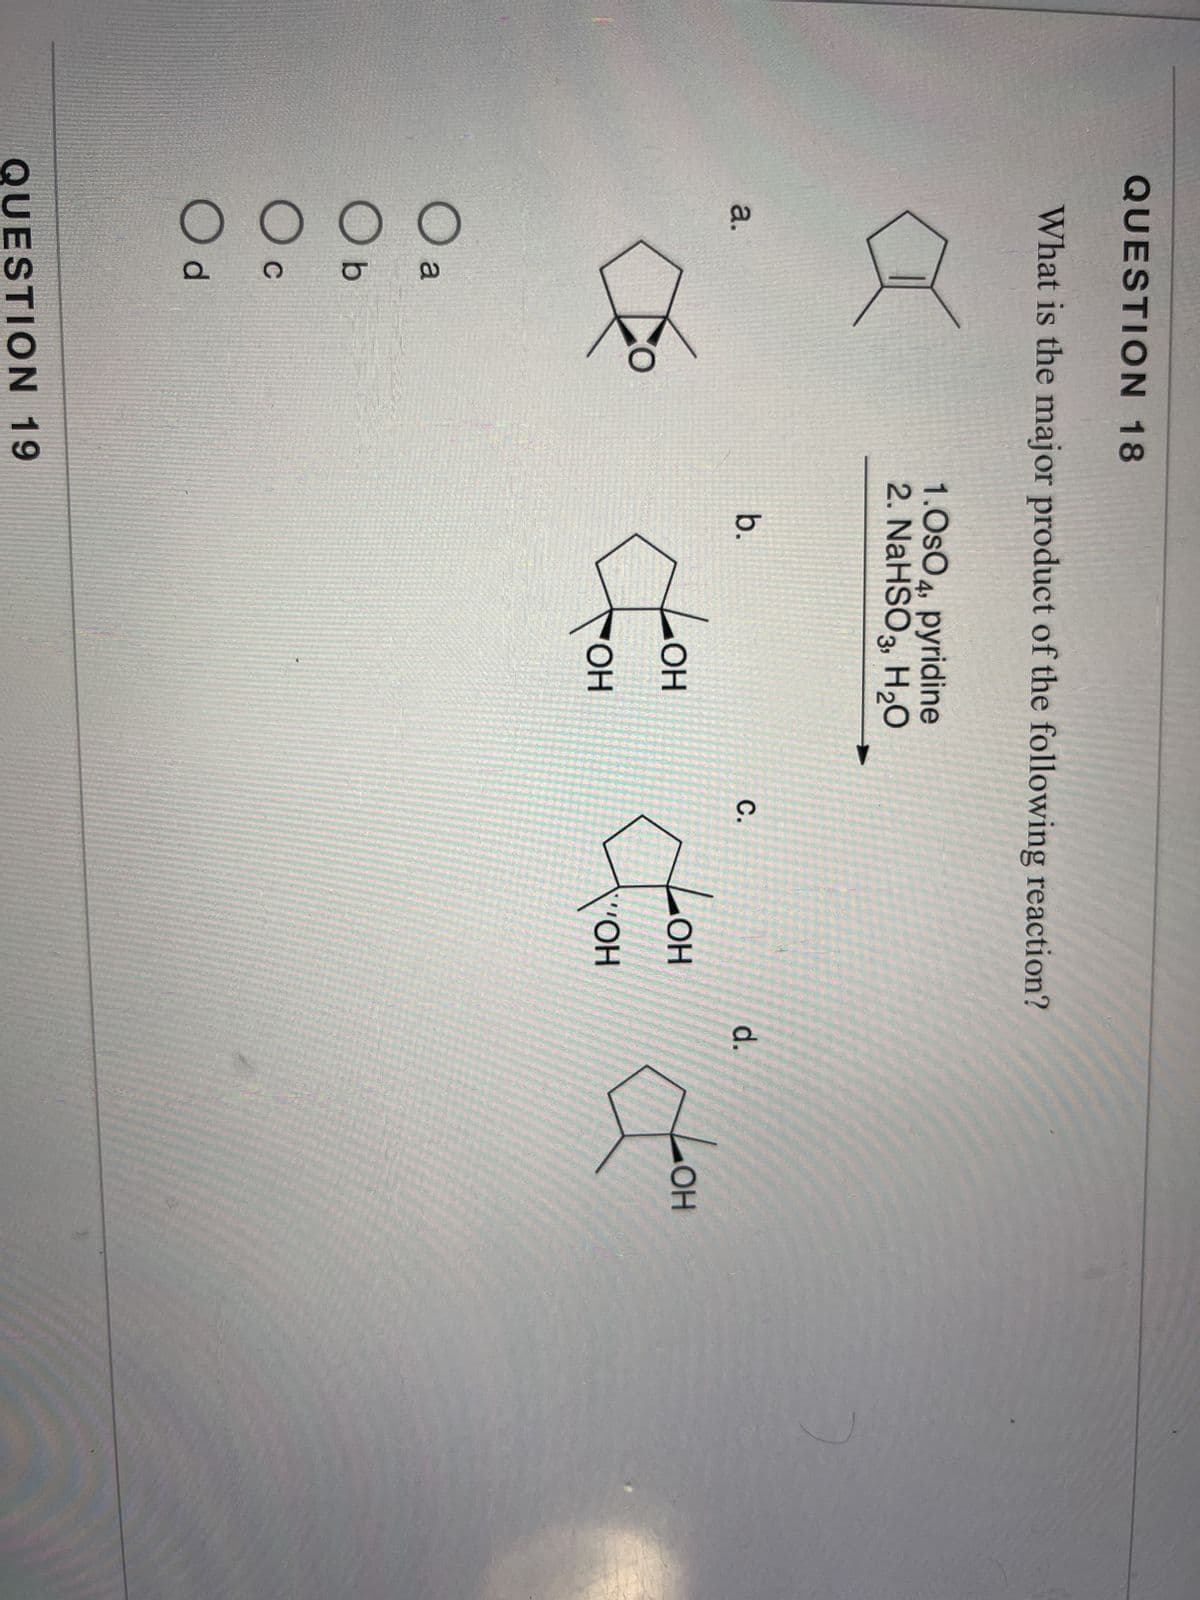 QUESTION 18
What is the major product of the following reaction?
a.
O a
Ob
O C
Od
QUESTION 19
1.OsO4, pyridine
2. NaHSO3, H₂O
b.
C.
d.
LOH
LOH
LOH
com com Joom
OH
VOH